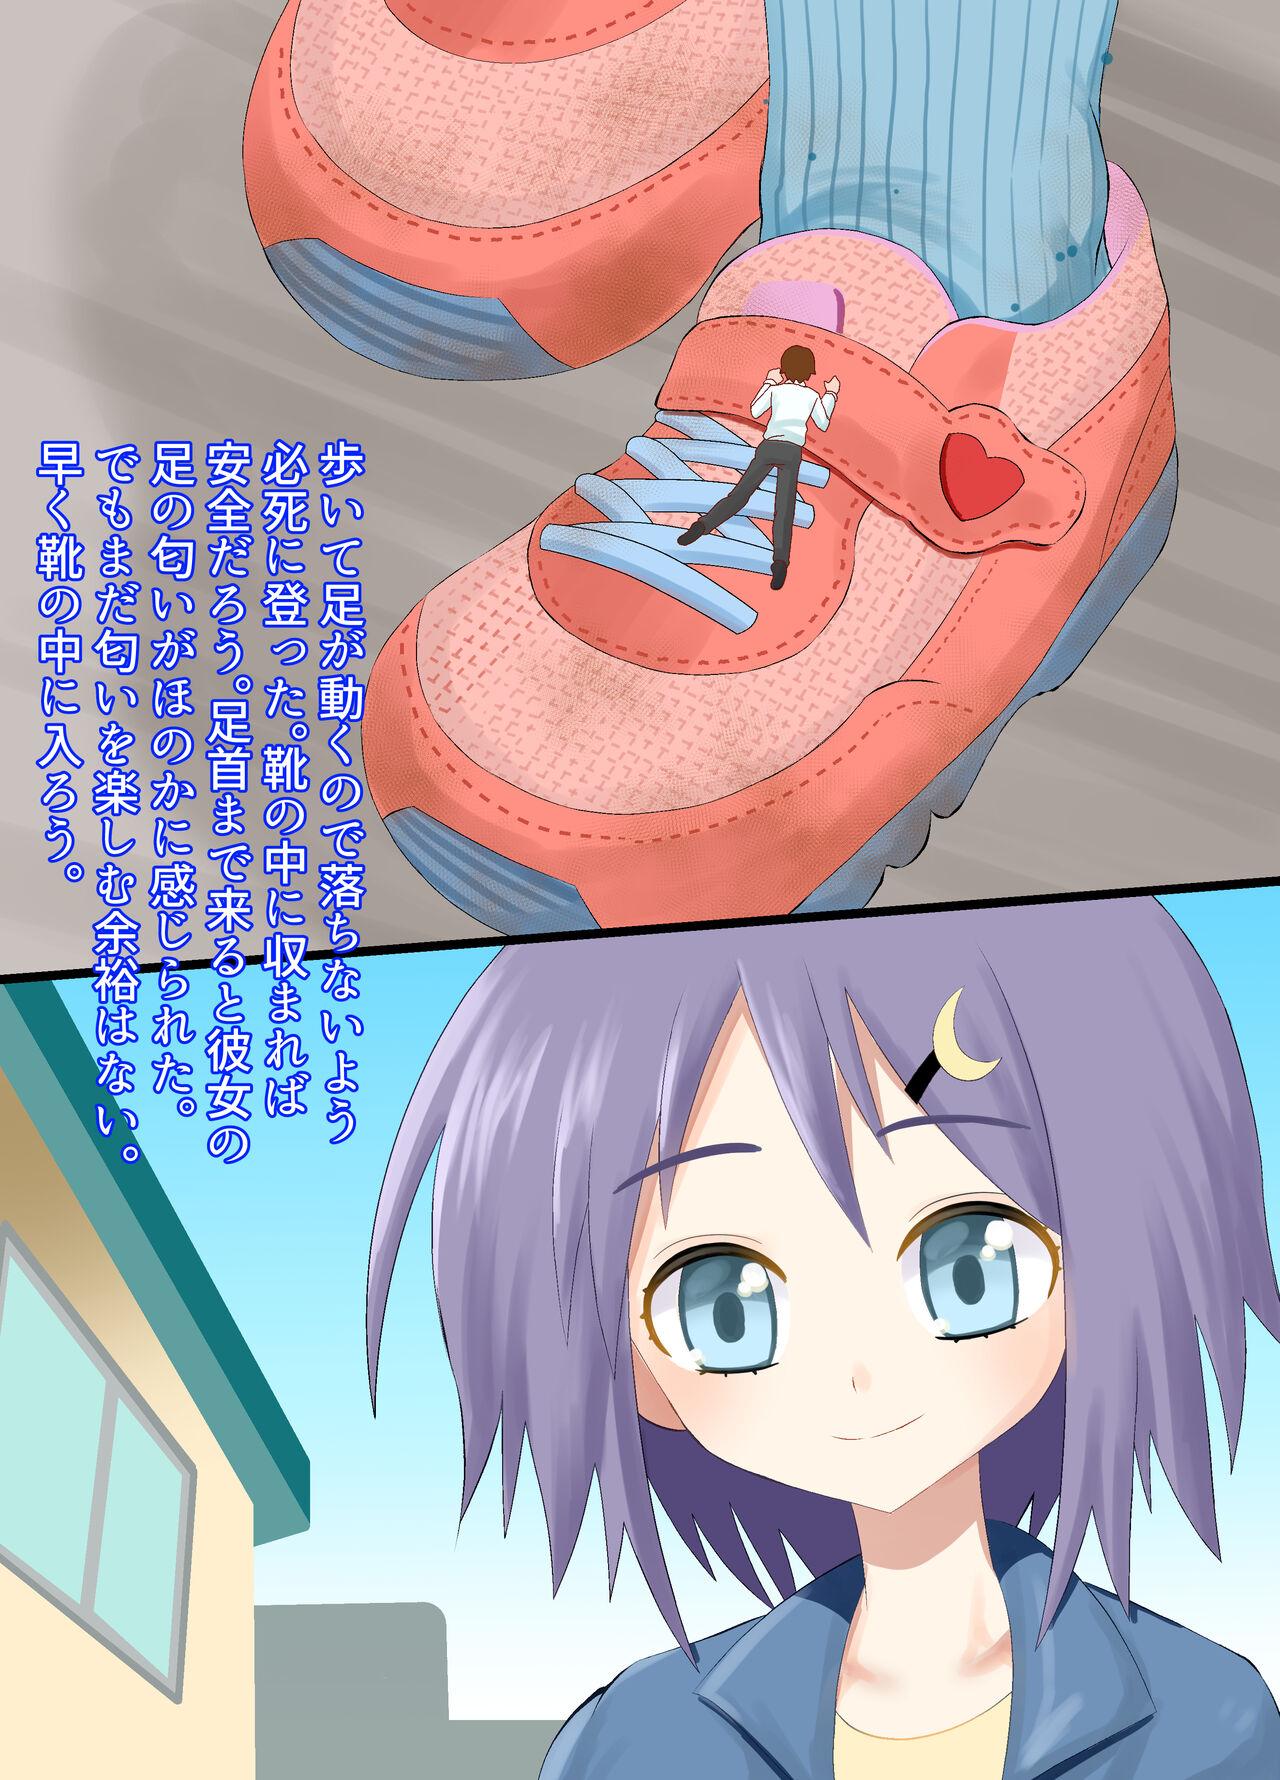 Cumming A CG collection of getting smaller and being stepped on by a girl - Original Dyke - Page 6